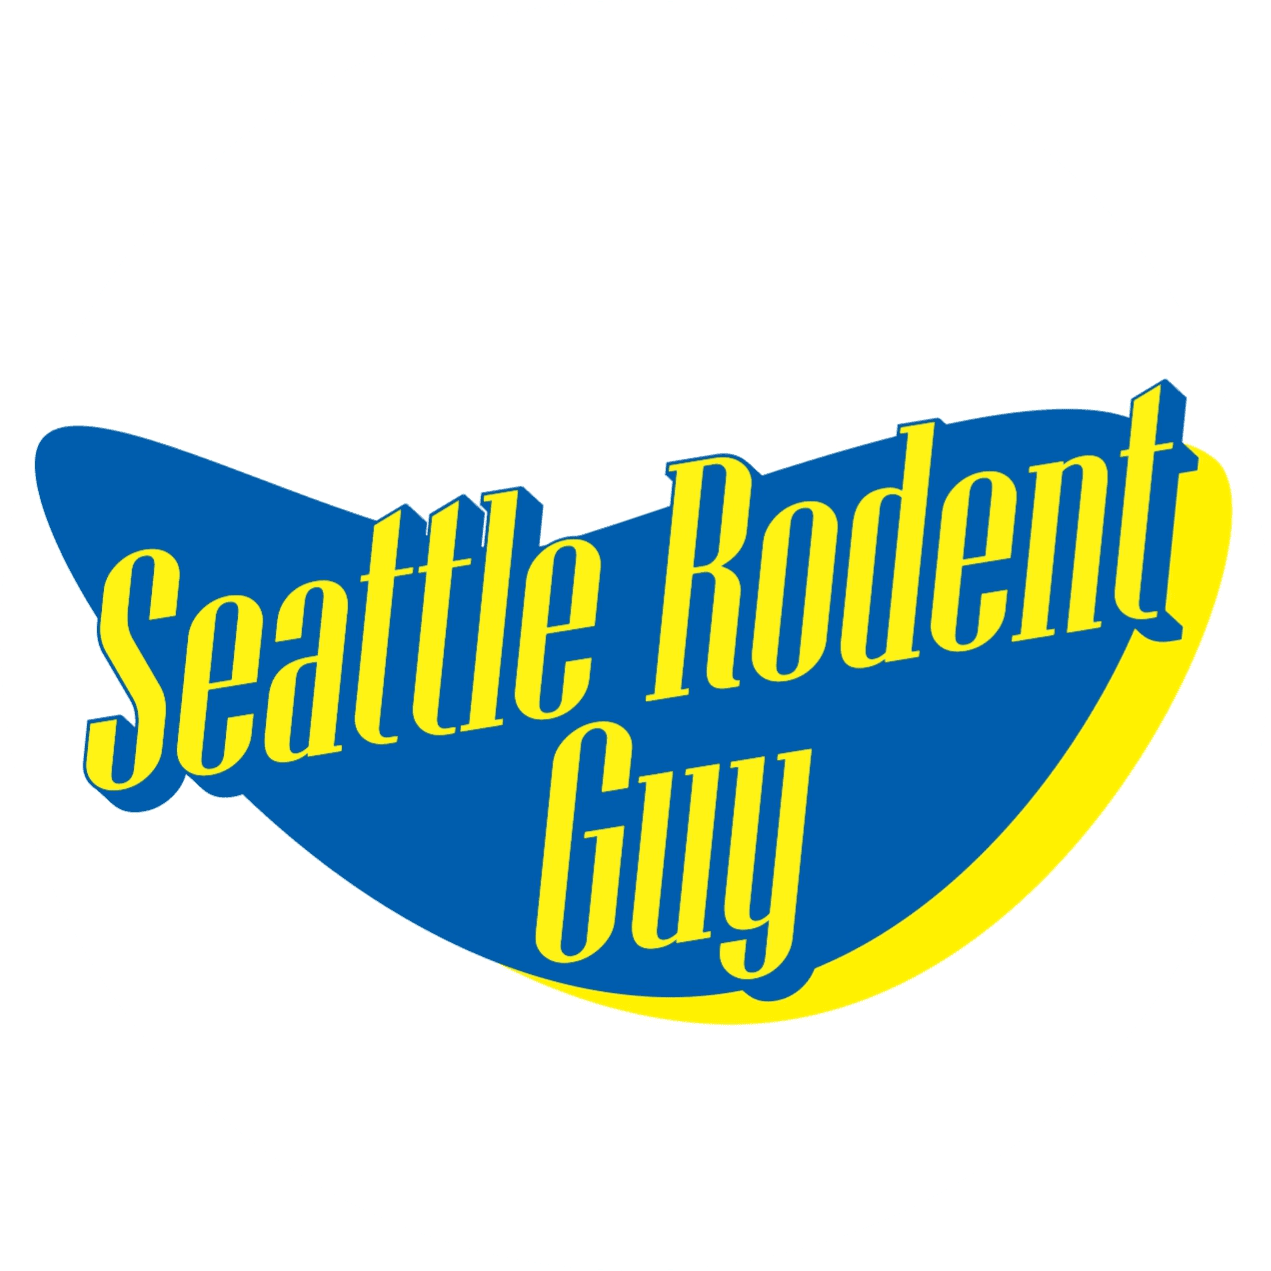 Seattle Rodent Guy